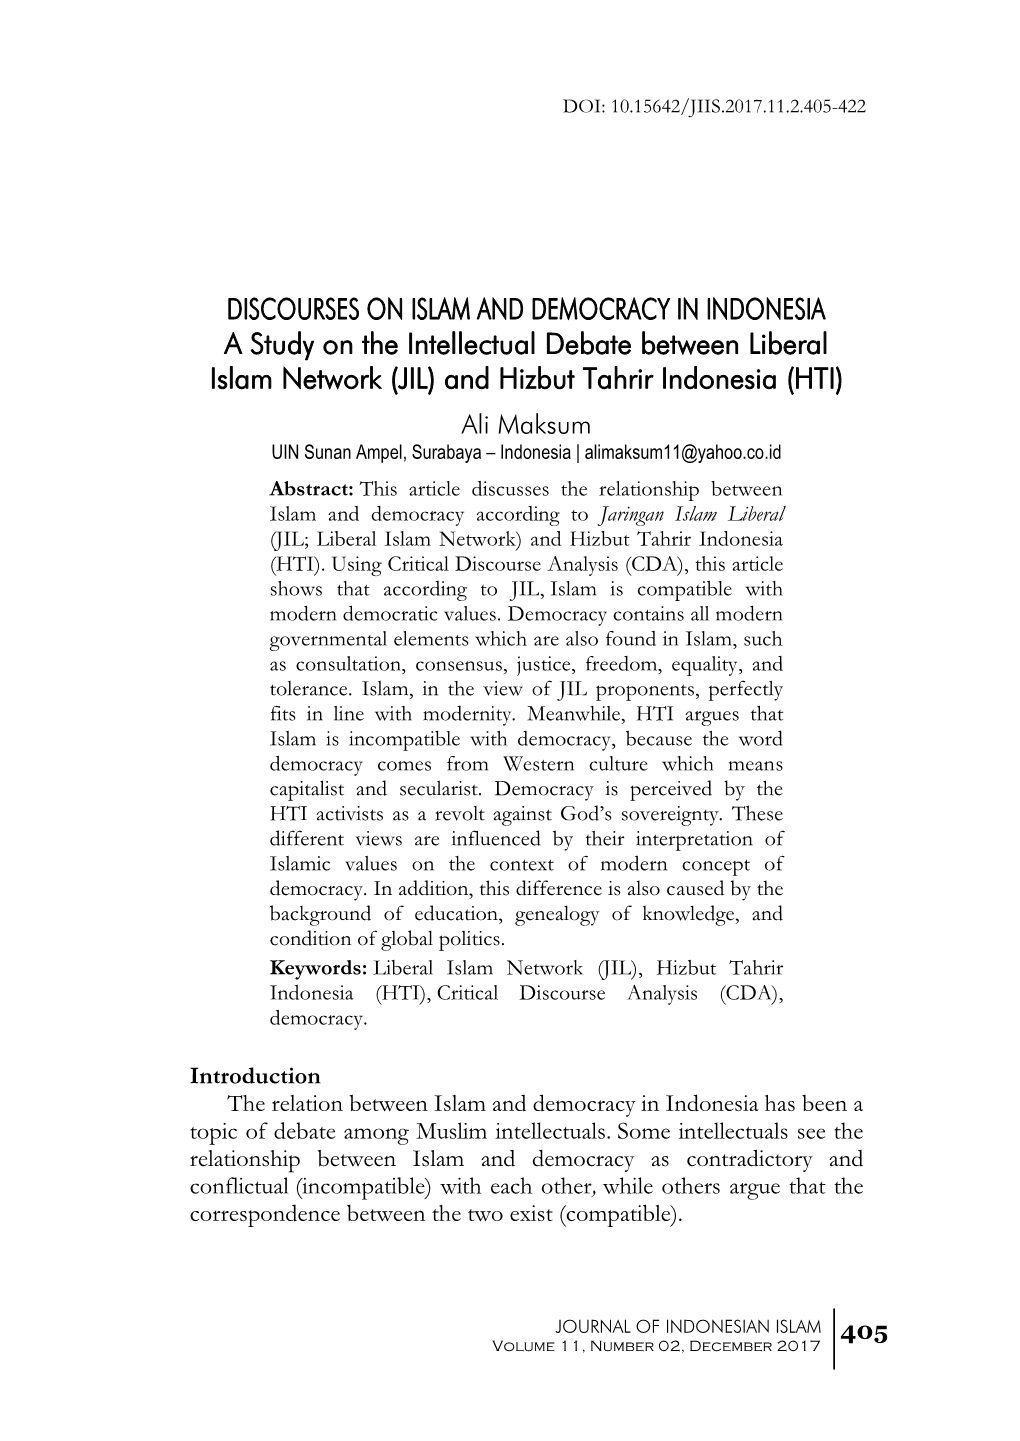 DISCOURSES on ISLAM and DEMOCRACY in INDONESIA a Study on the Intellectual Debate Between Liberal Islam Network